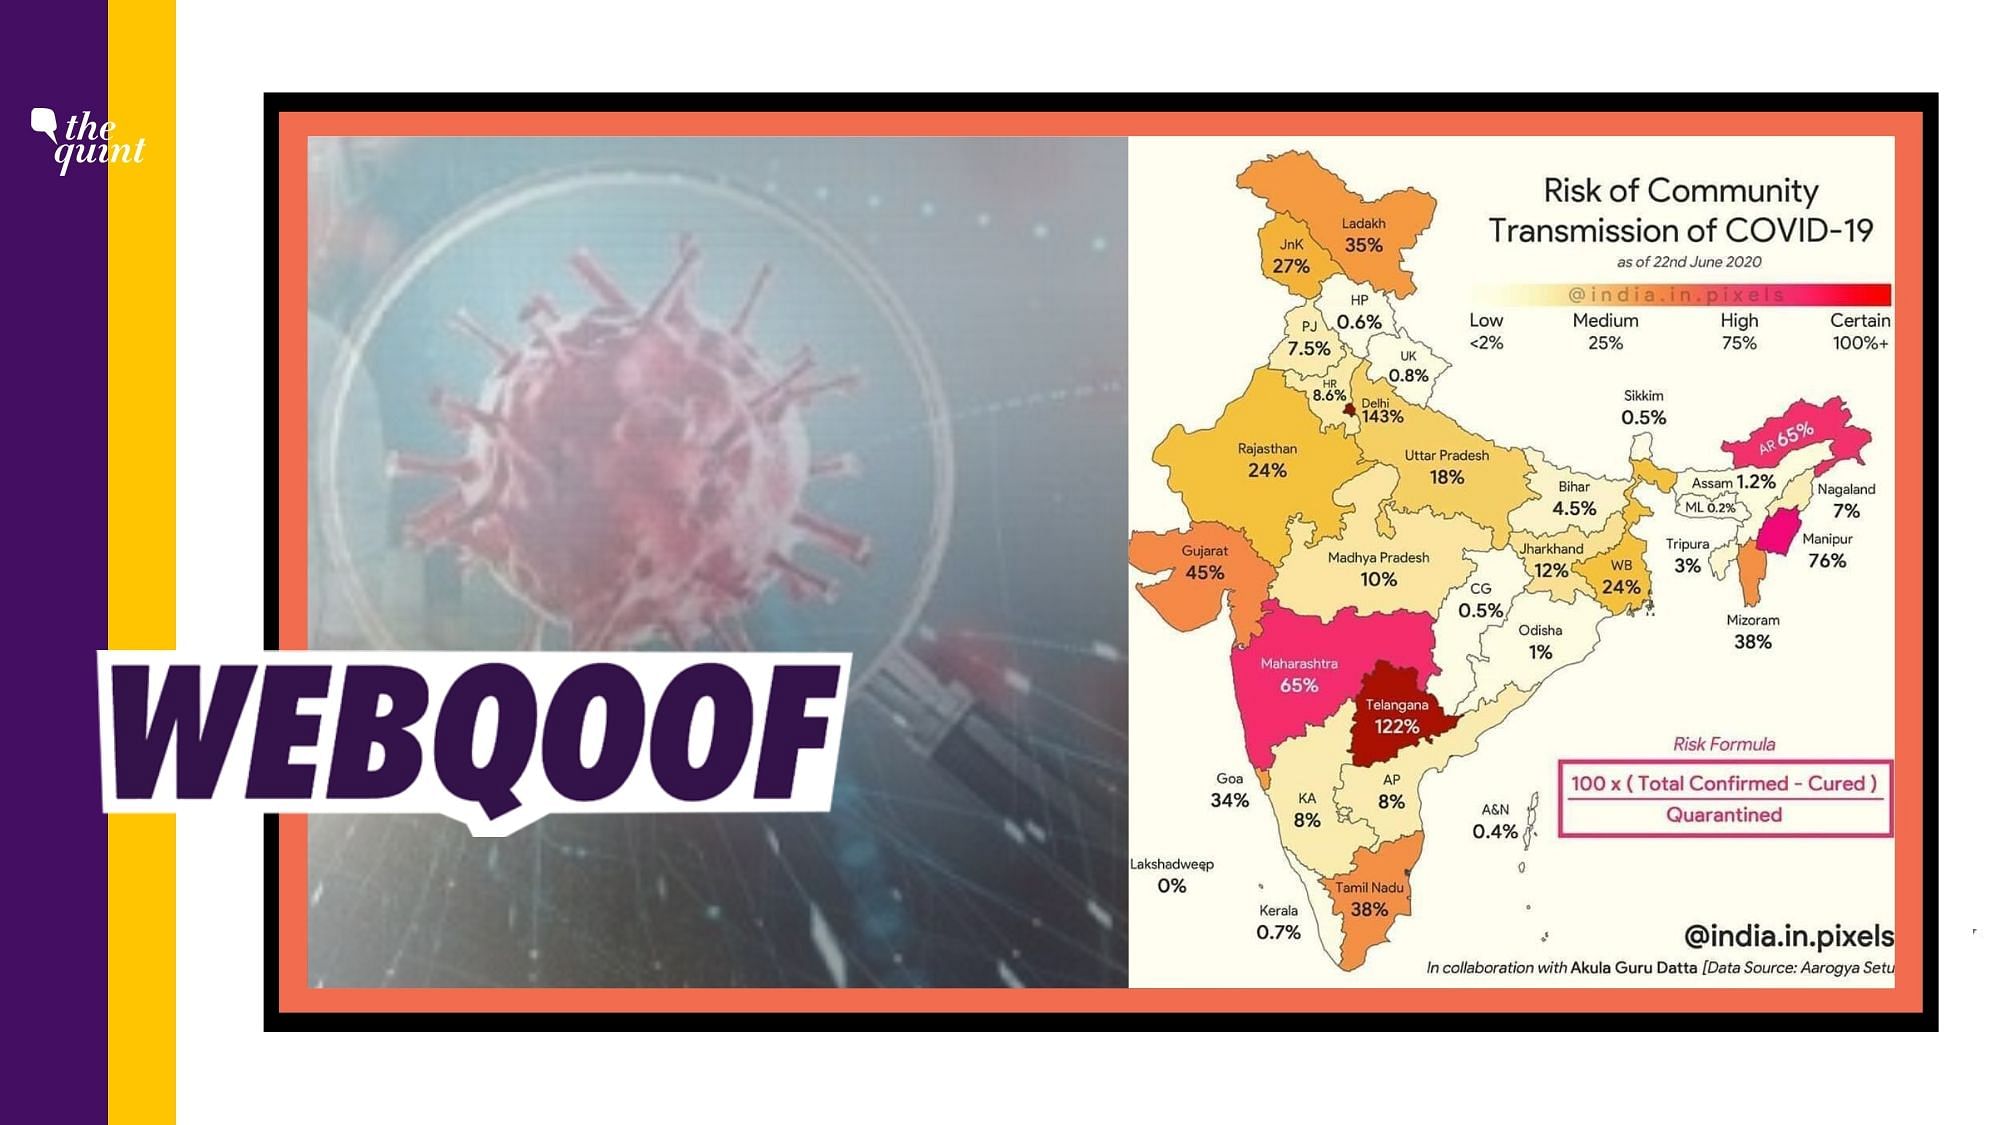 An infographic claims to show the risk of community transmission of coronavirus in various states of India.&nbsp;